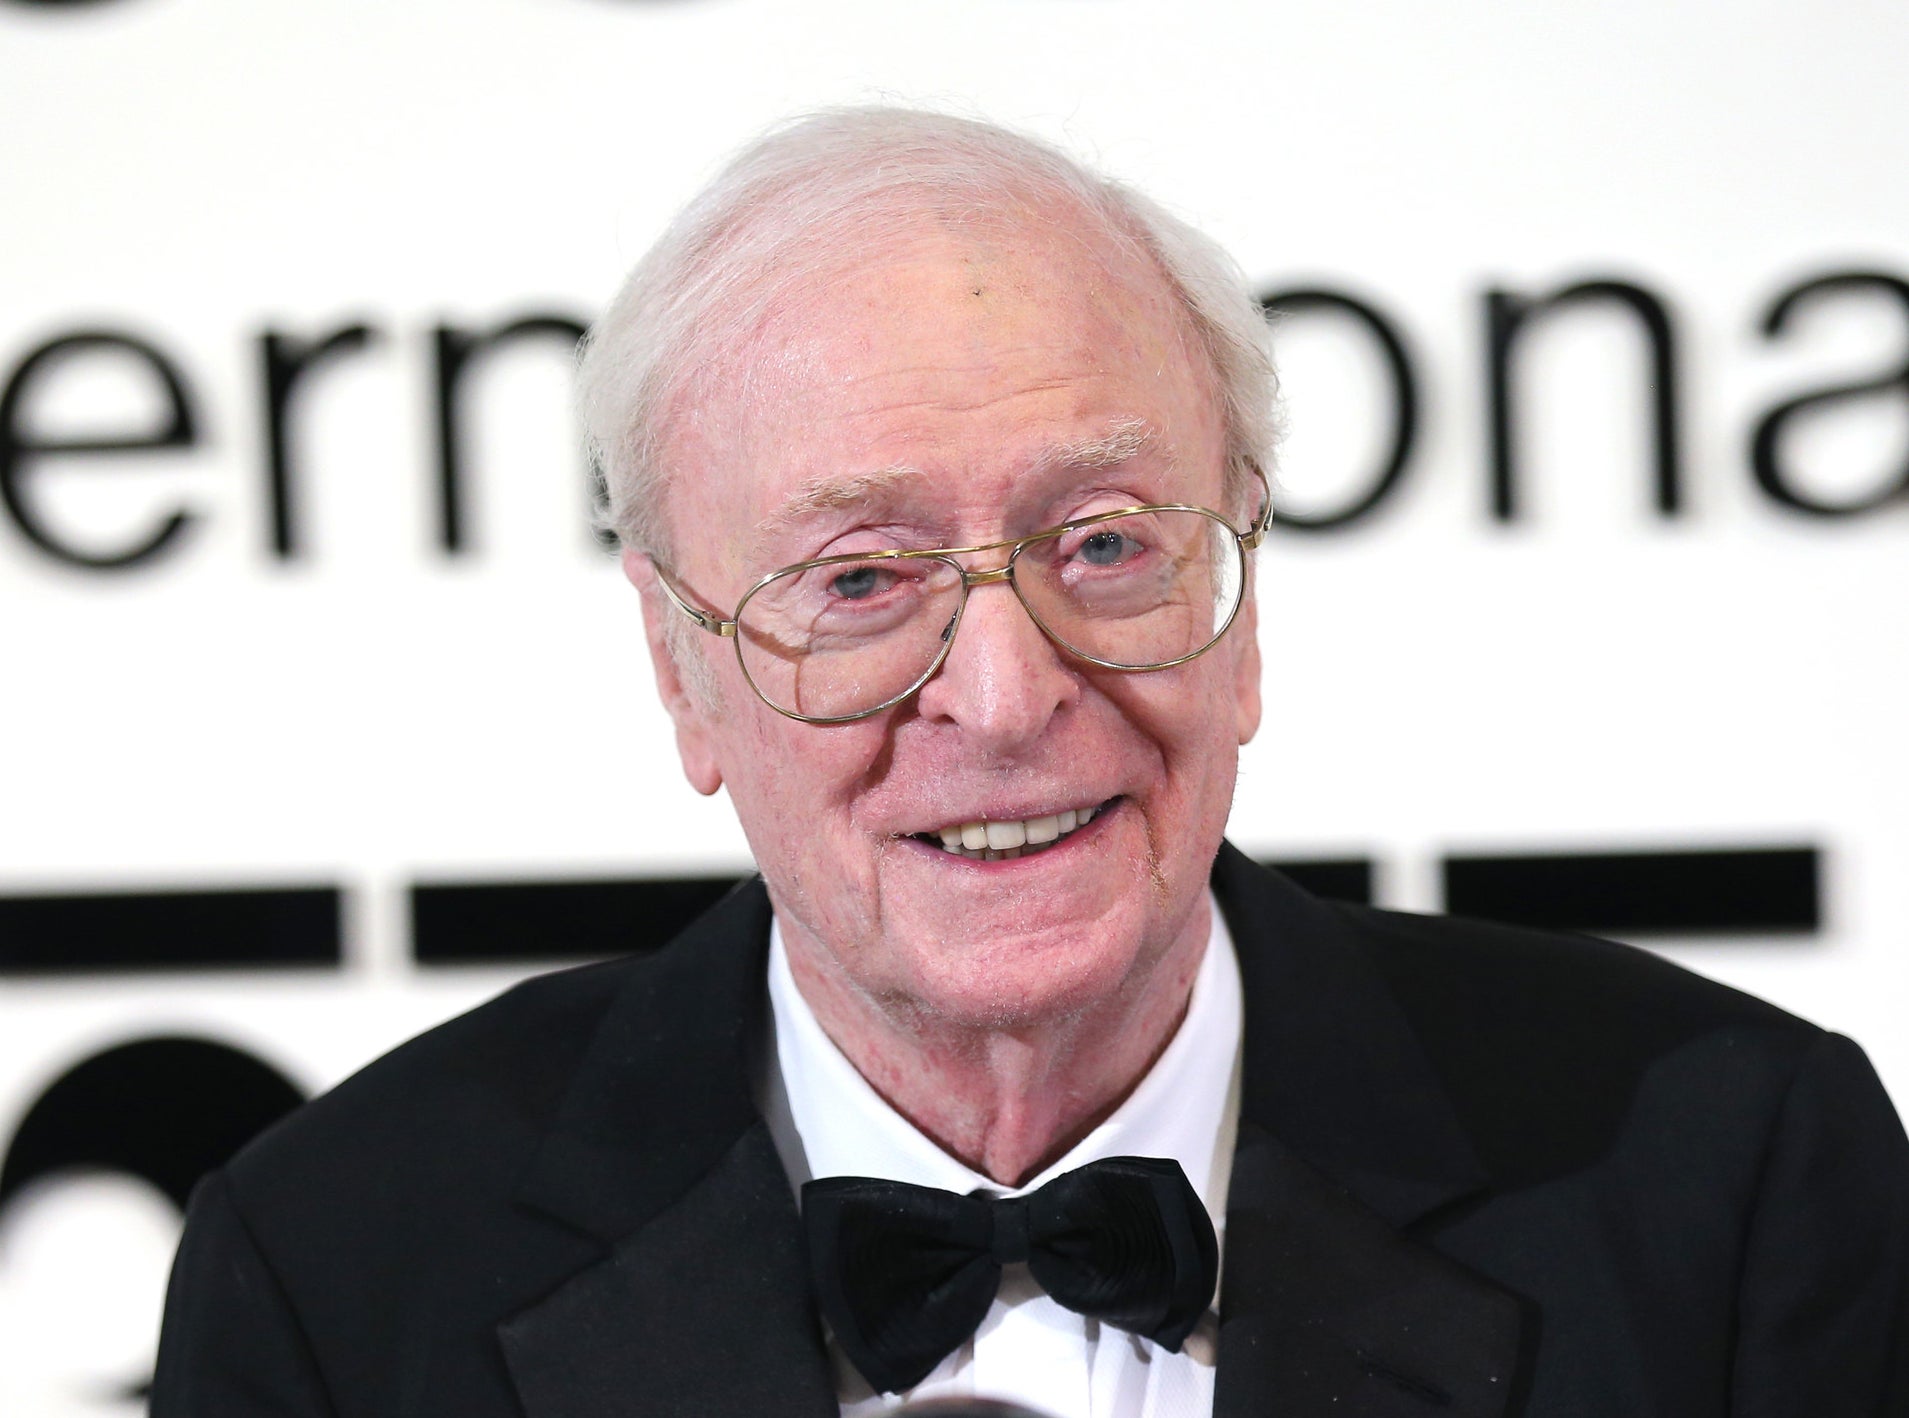 Sir Michael Caine is awarded with the Crystal Globe for Outstanding Contribution to World Cinema